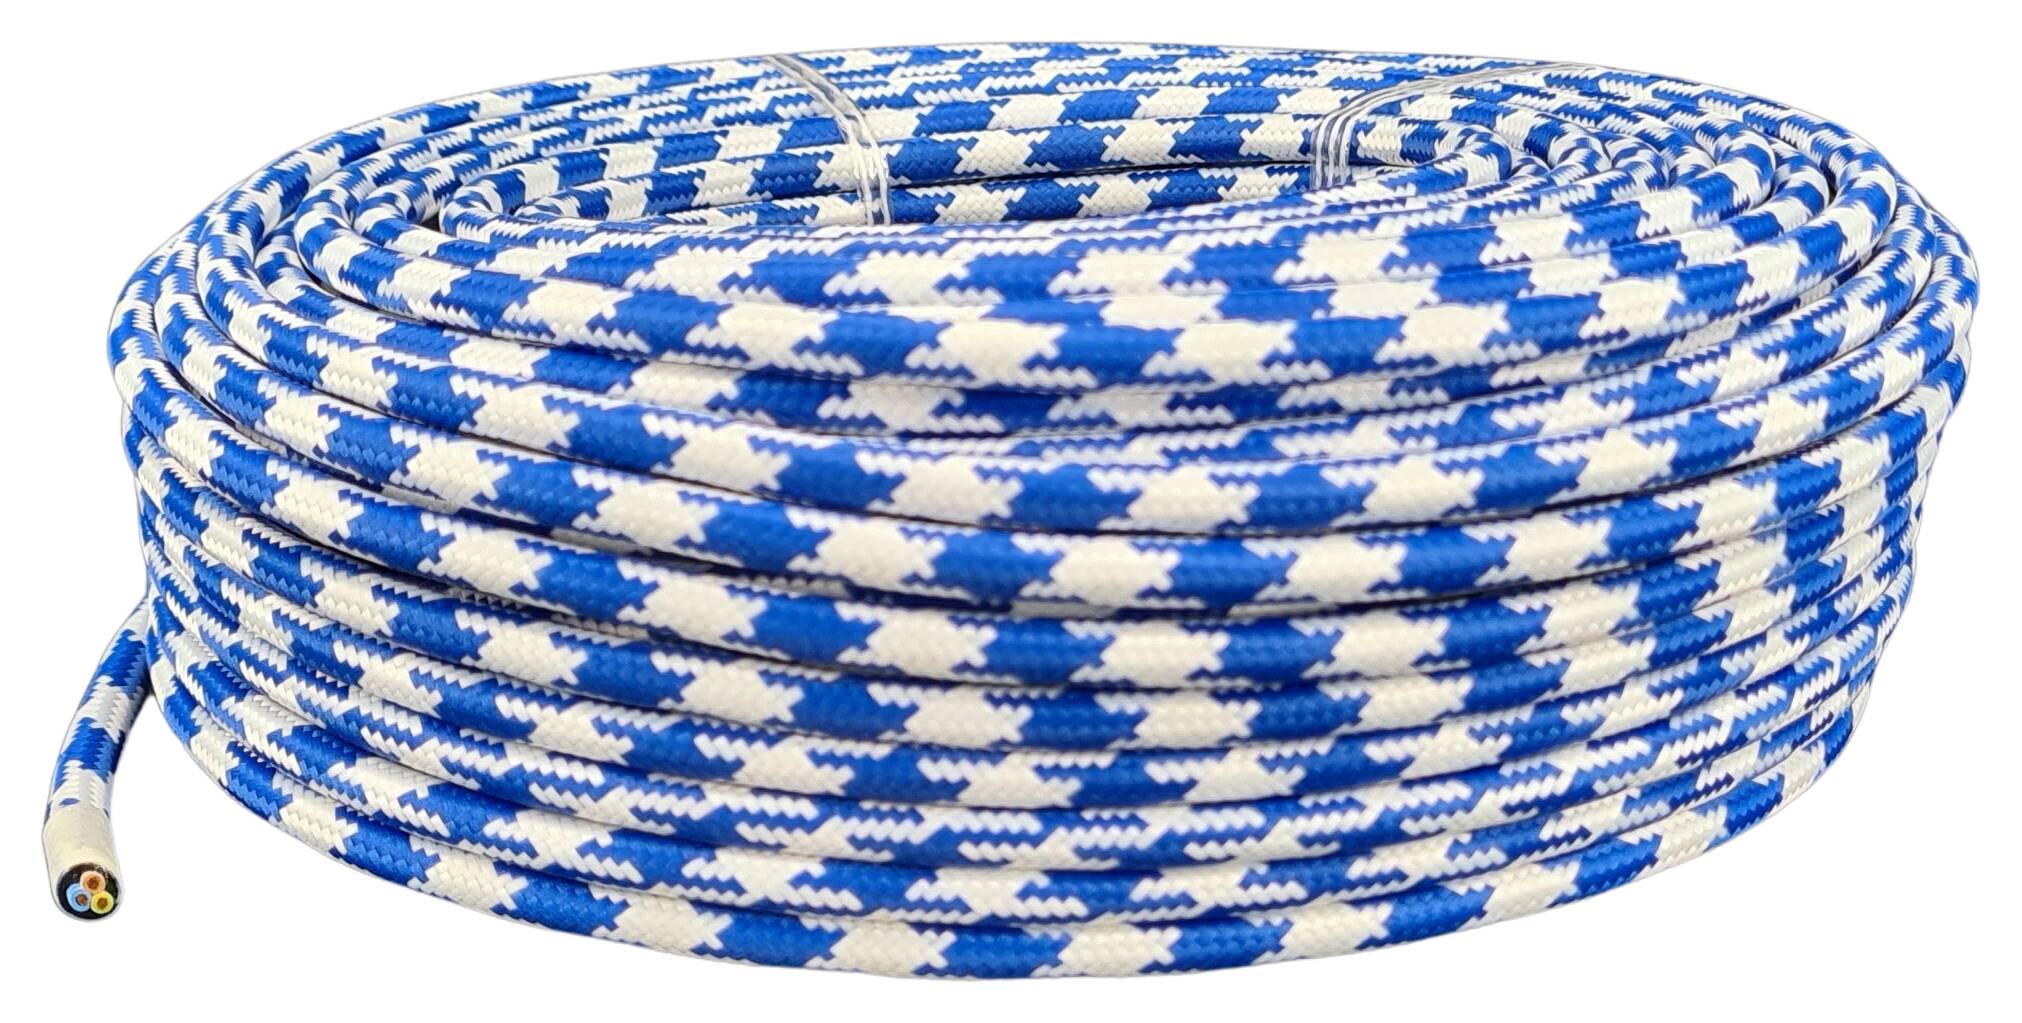 Cable 3G 0,75 H03VV-F textile braided RAL 5002 darkblue-white (cockscomp)